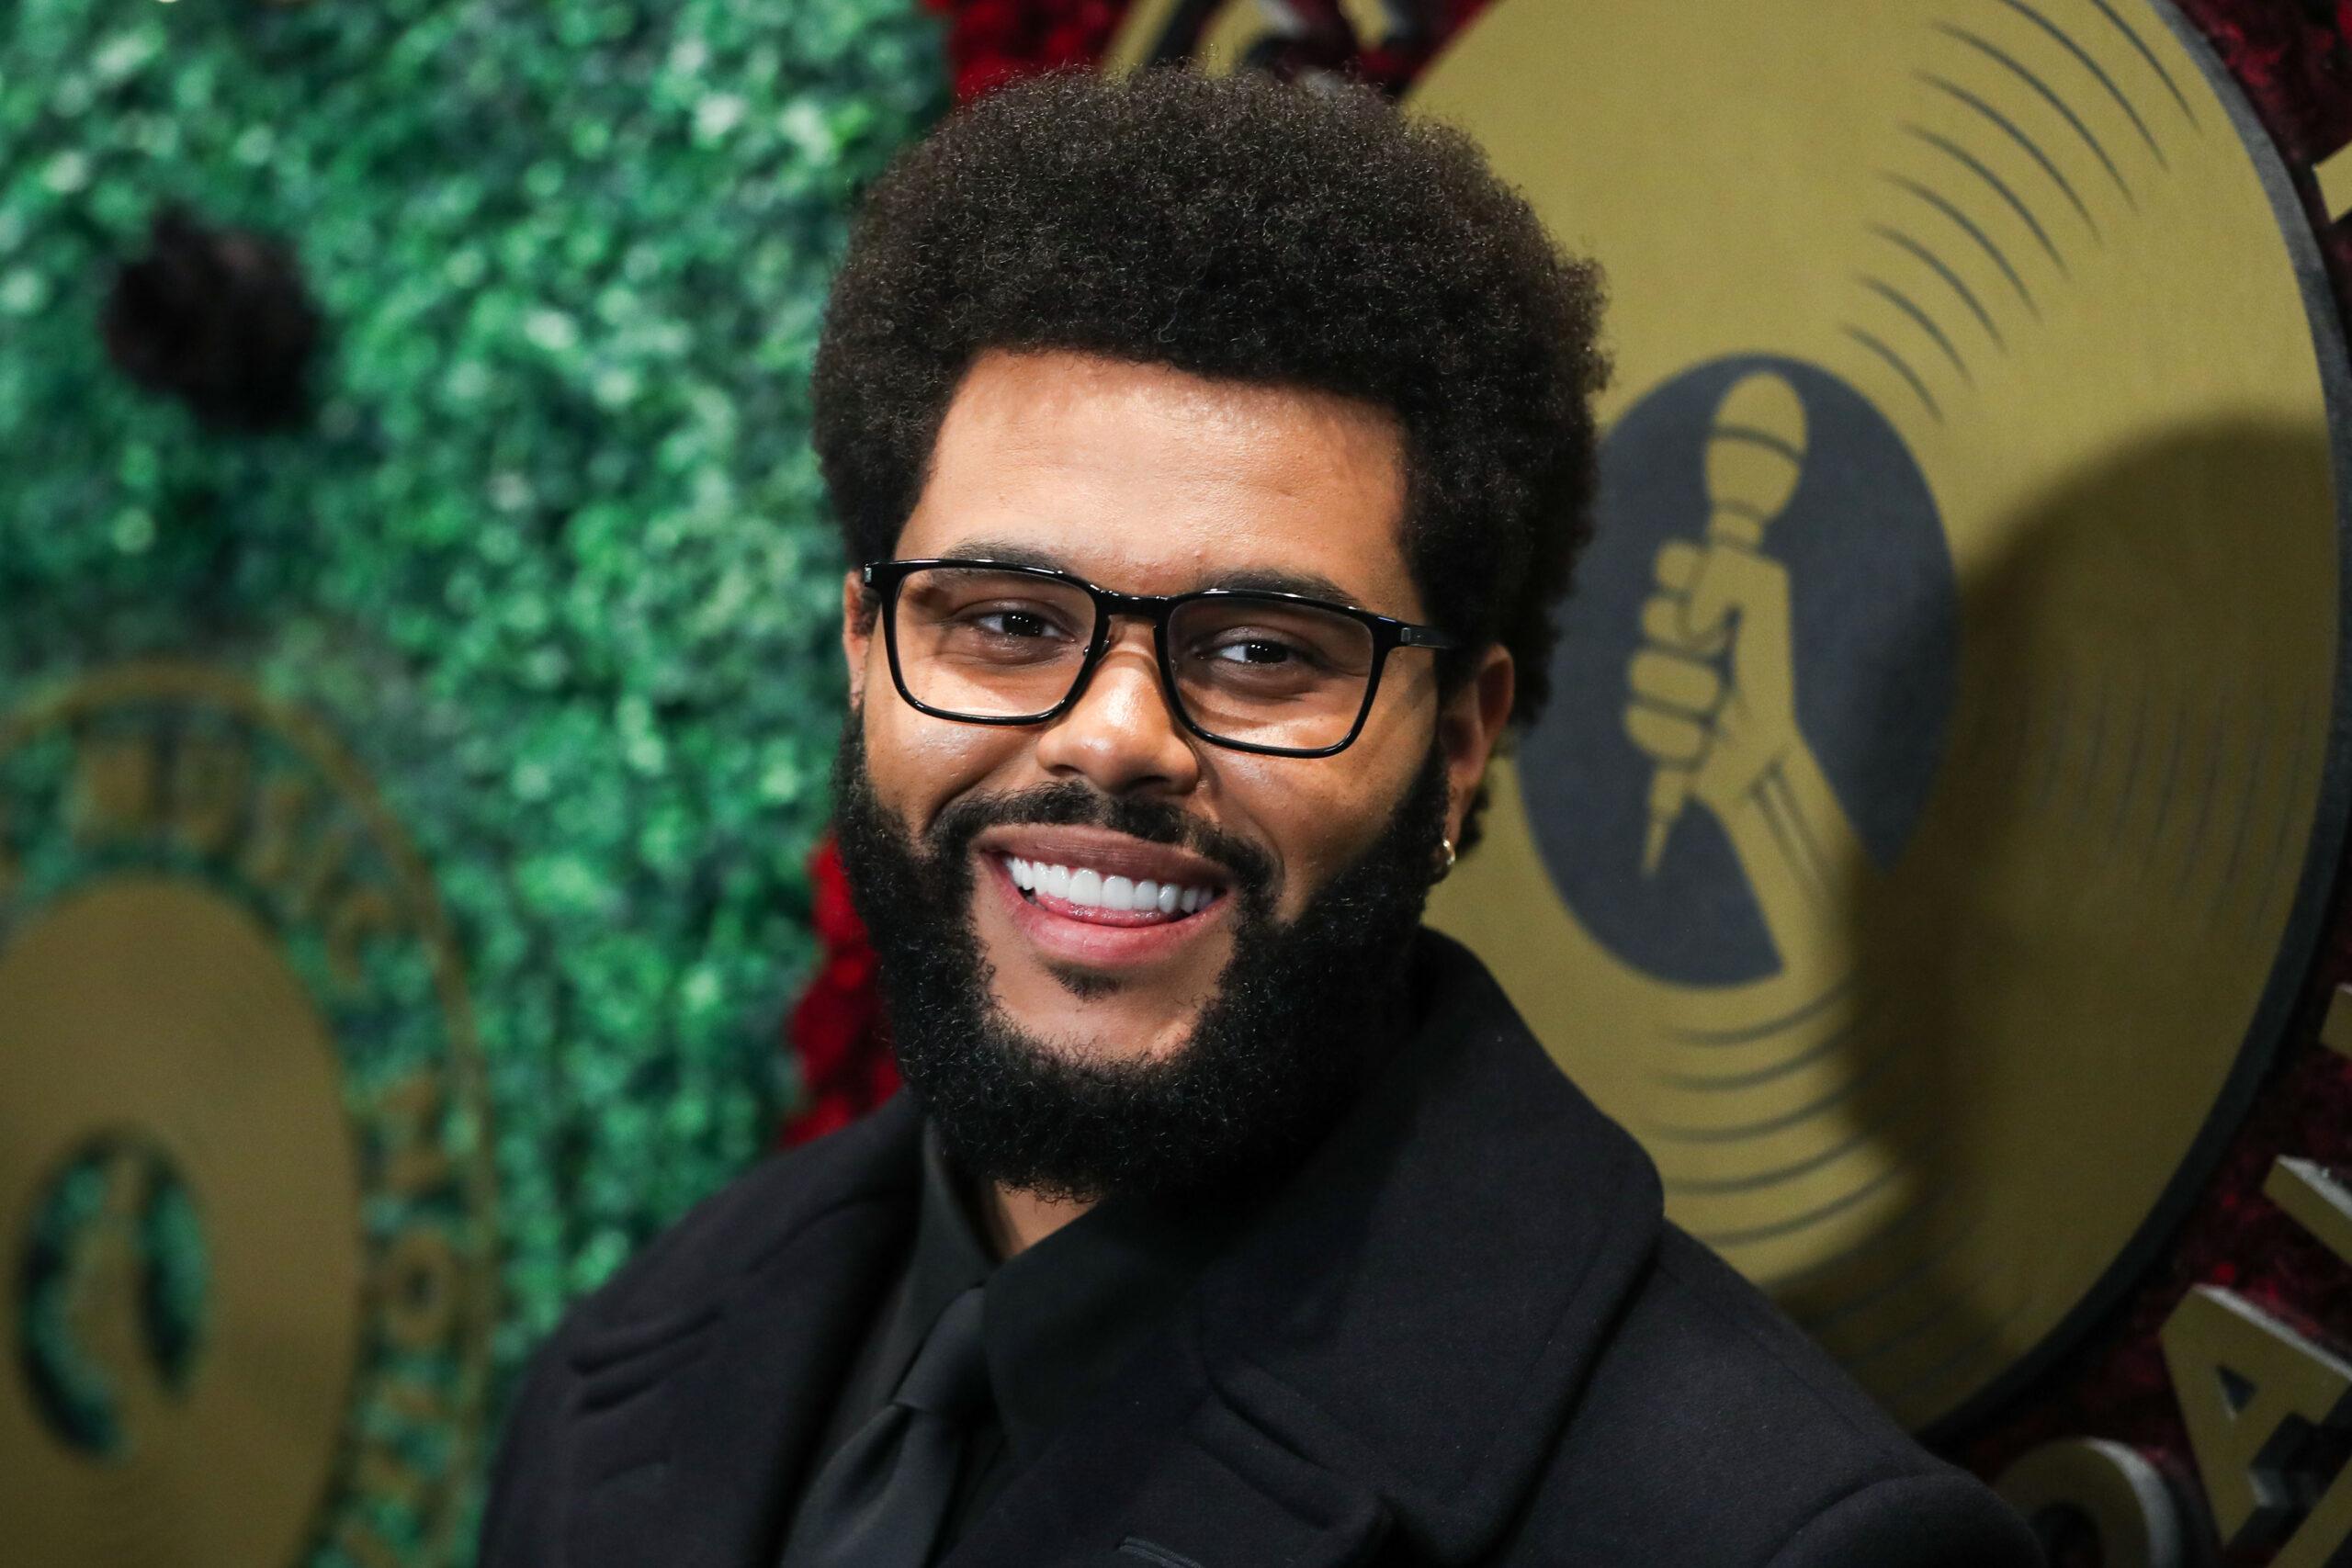 The Weeknd at the 1st Annual Black Music Action Coalition's Music in Action Awards